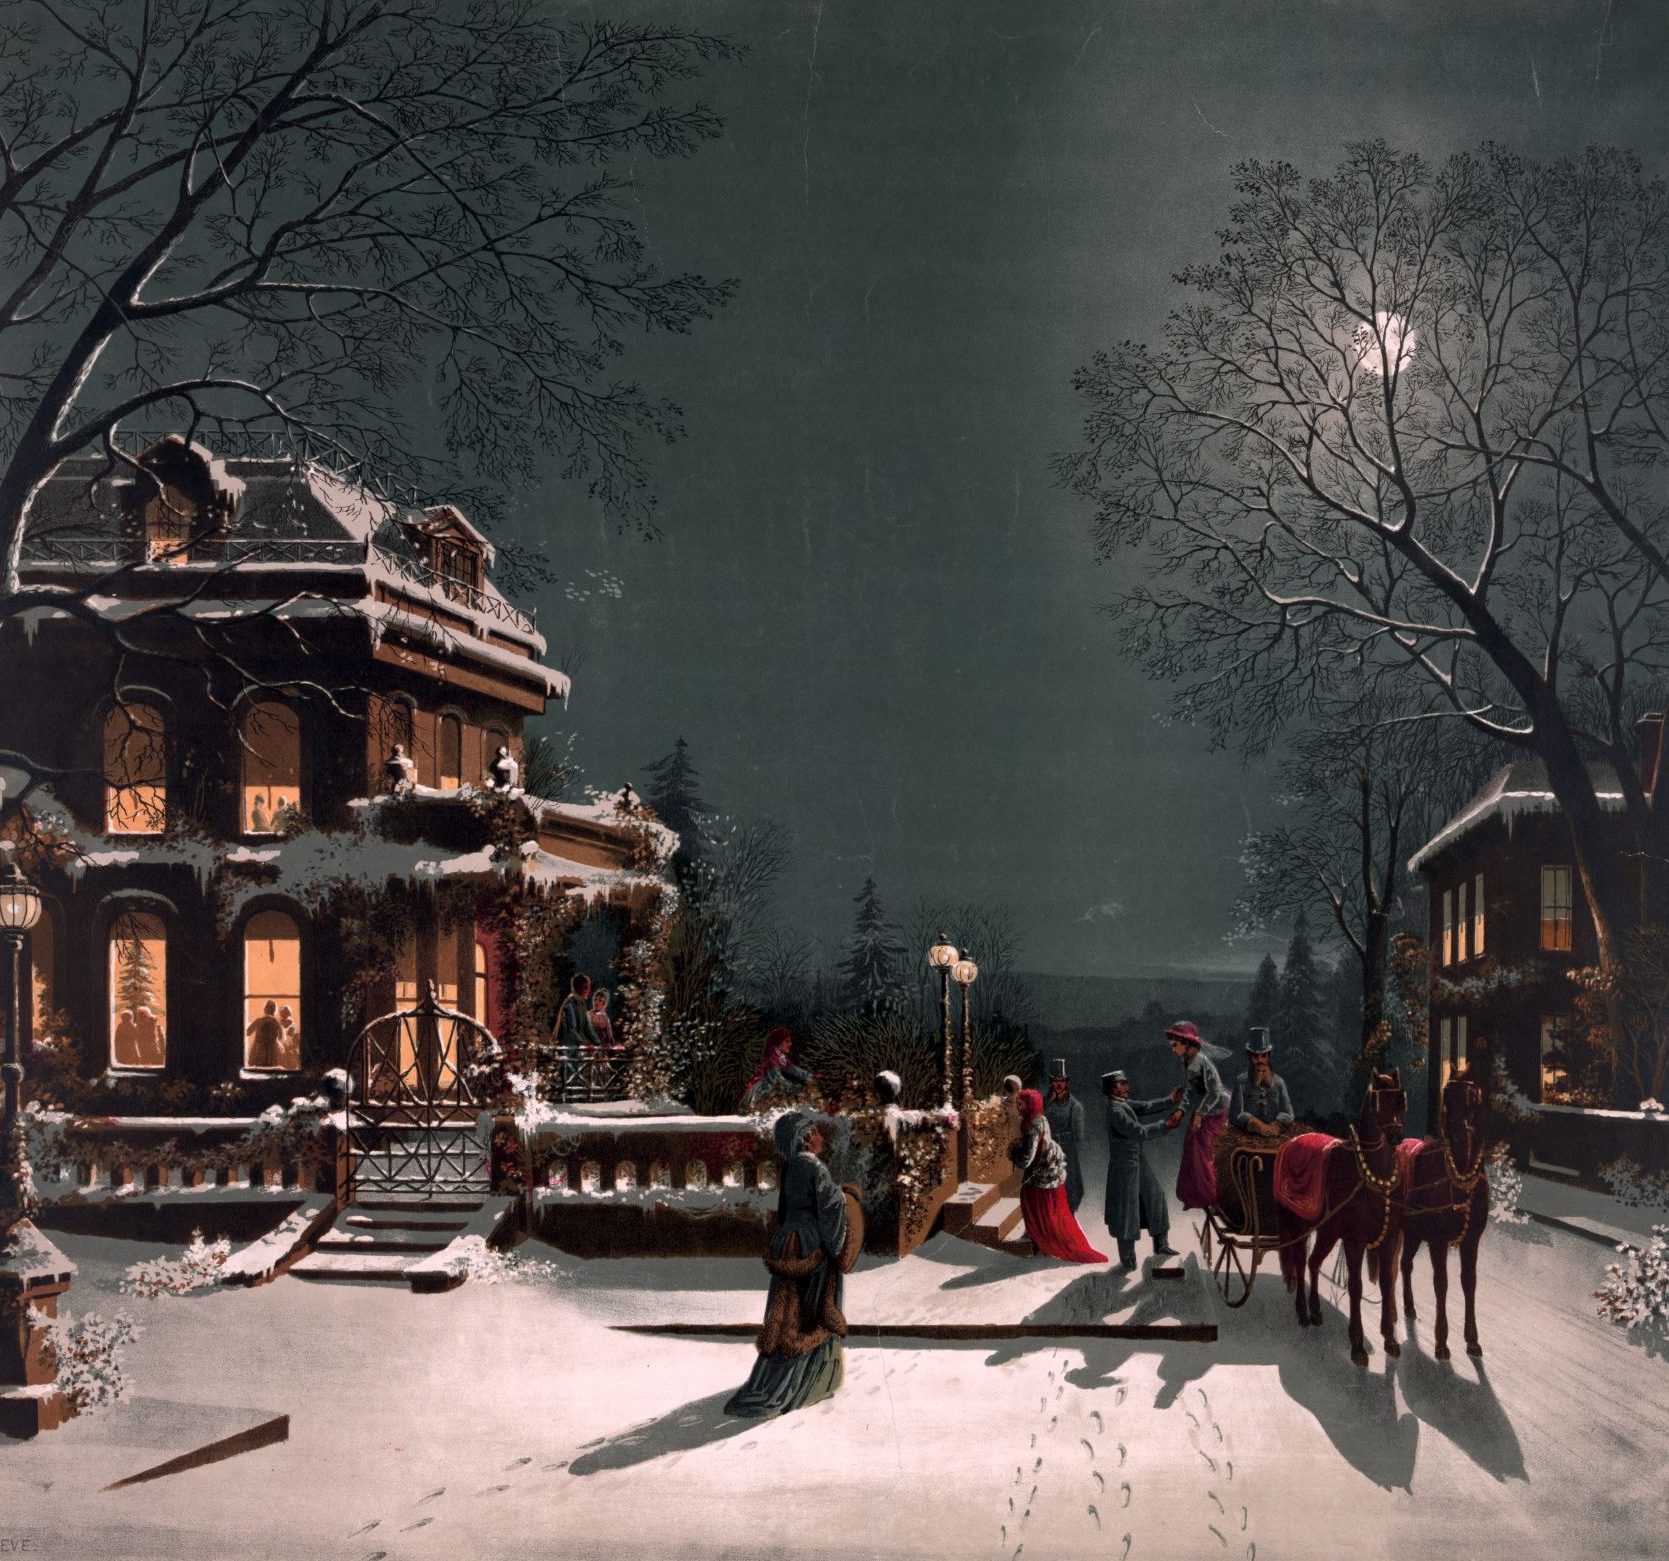 Victorian contributions to our modern Christmas traditions